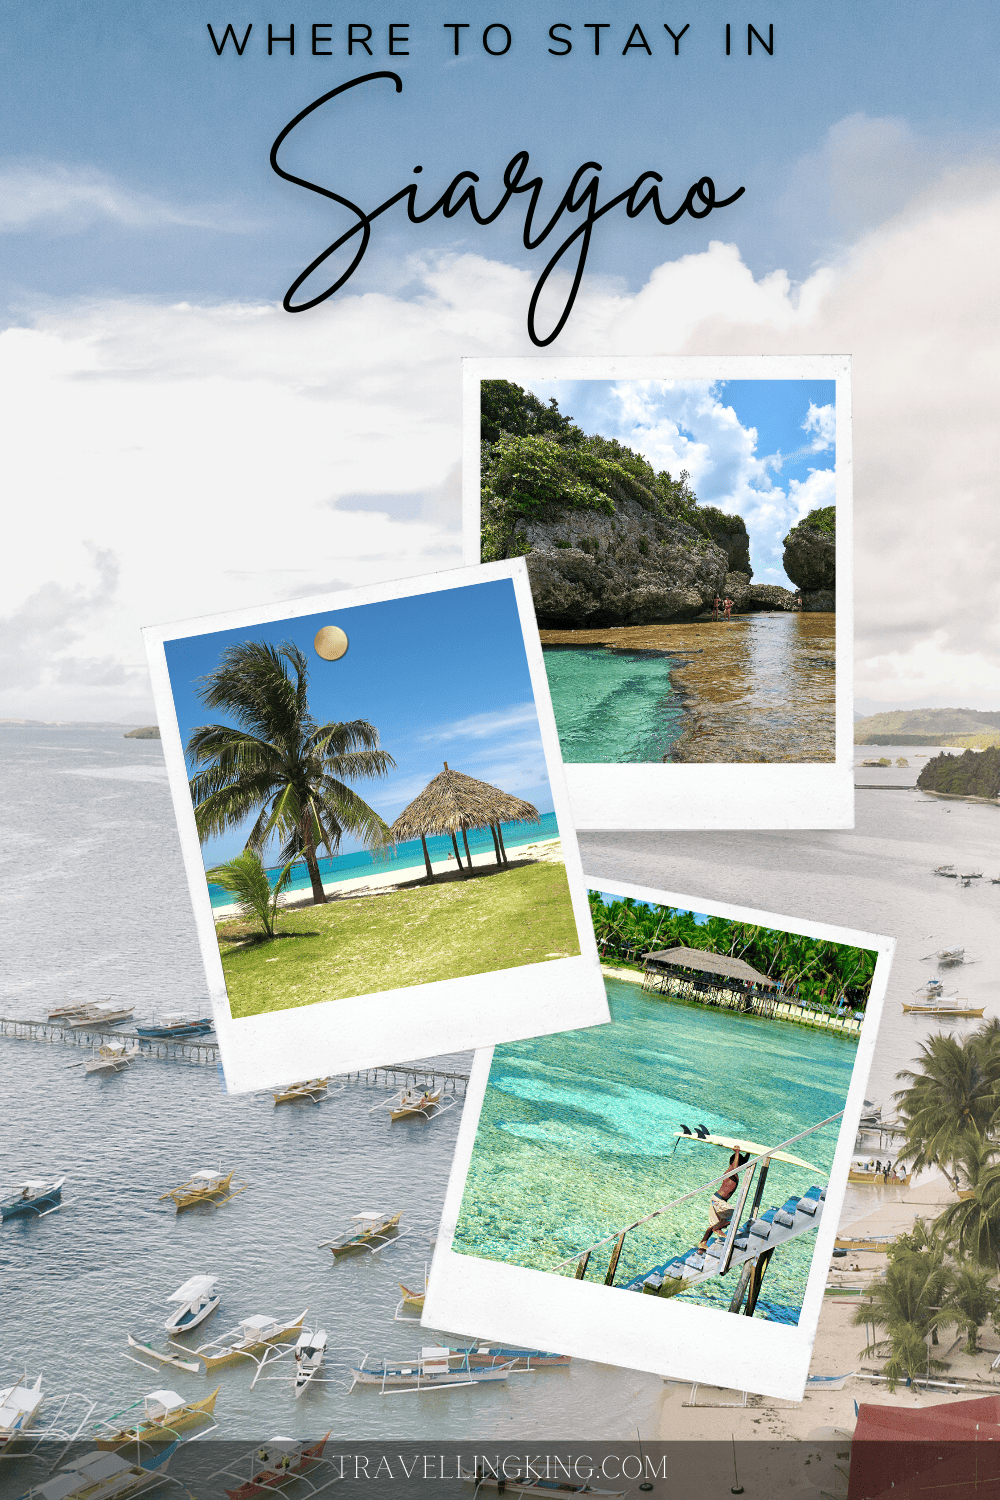 Where to stay in Siargao